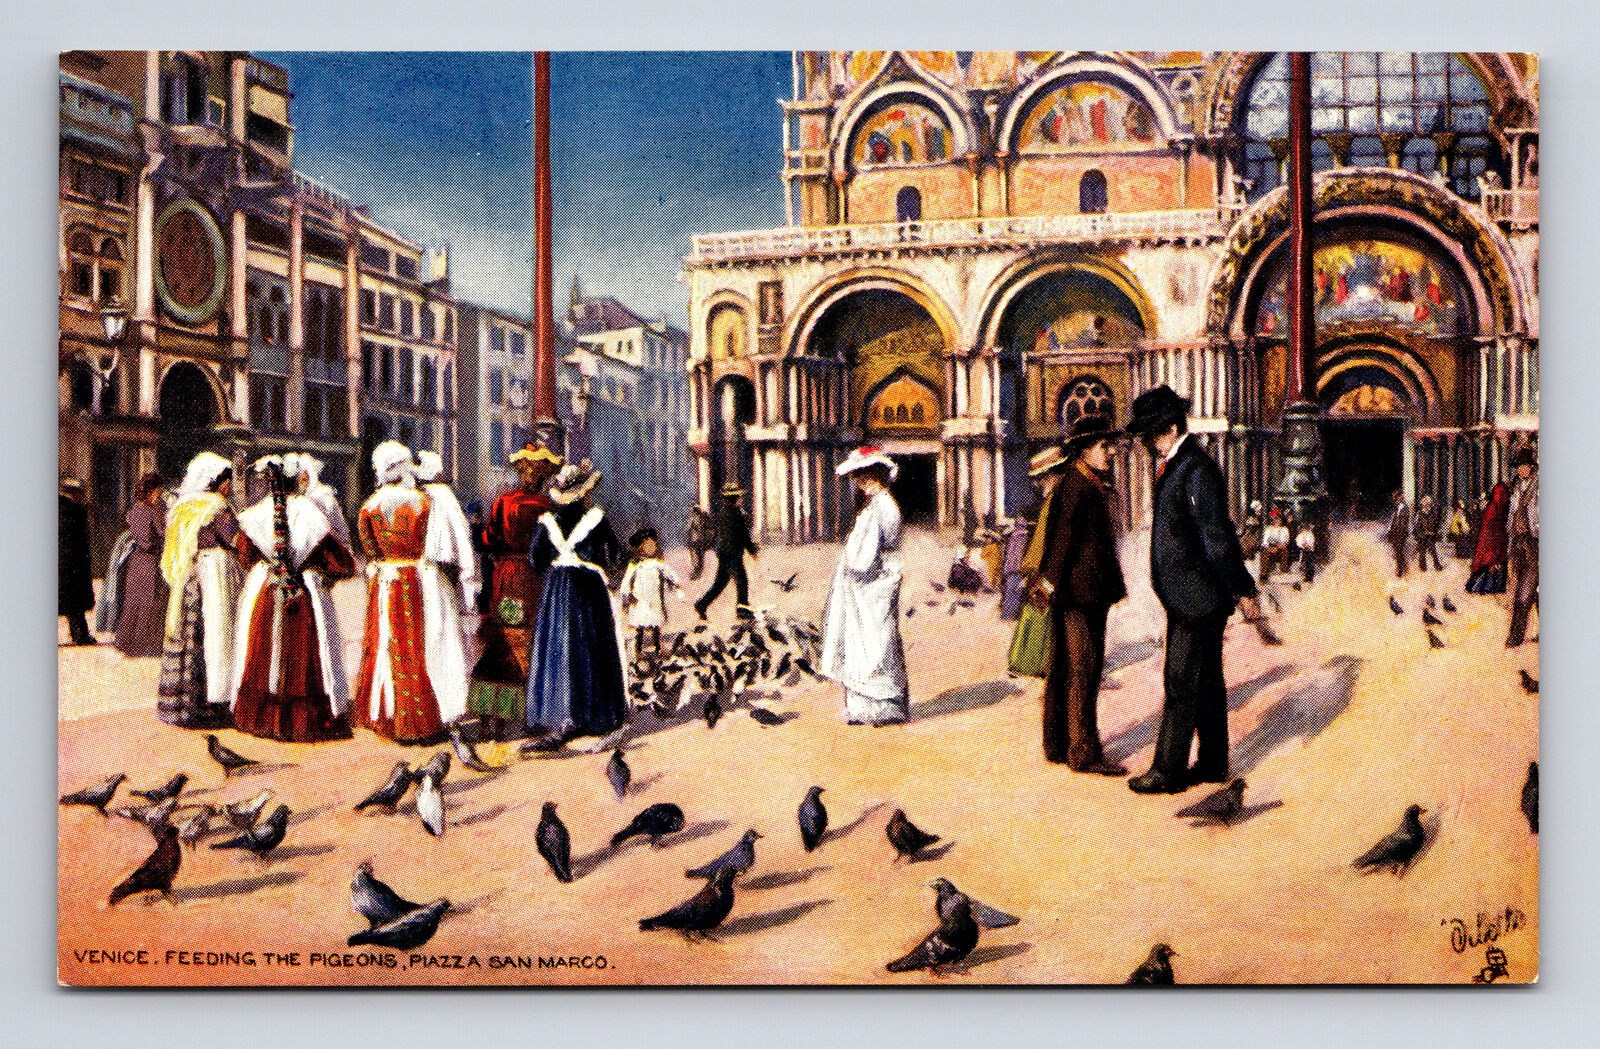 Feeding Pigeons Piazza San Marco Cathedral Venice Italy Tuck\'s Oilette Postcard